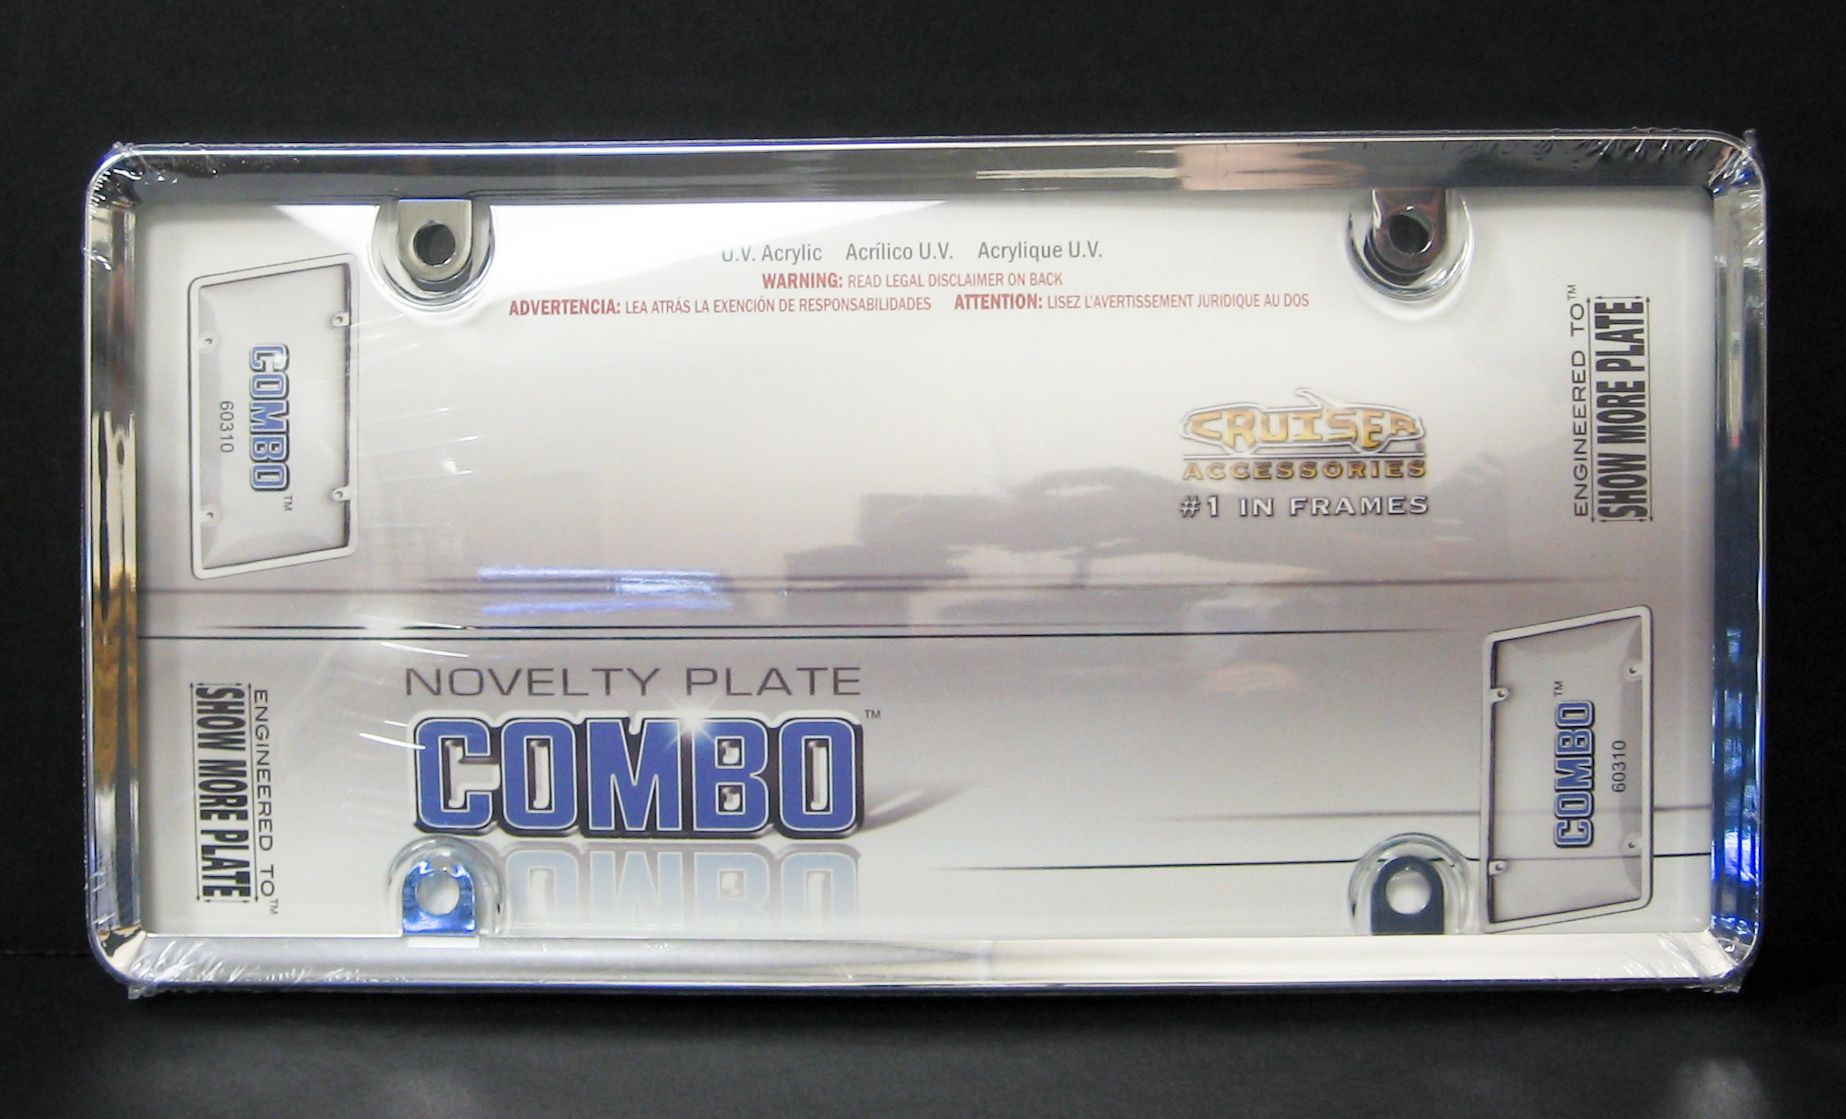   Protective Bubble License Plate Frame   Chrome and Acrylic Plastic